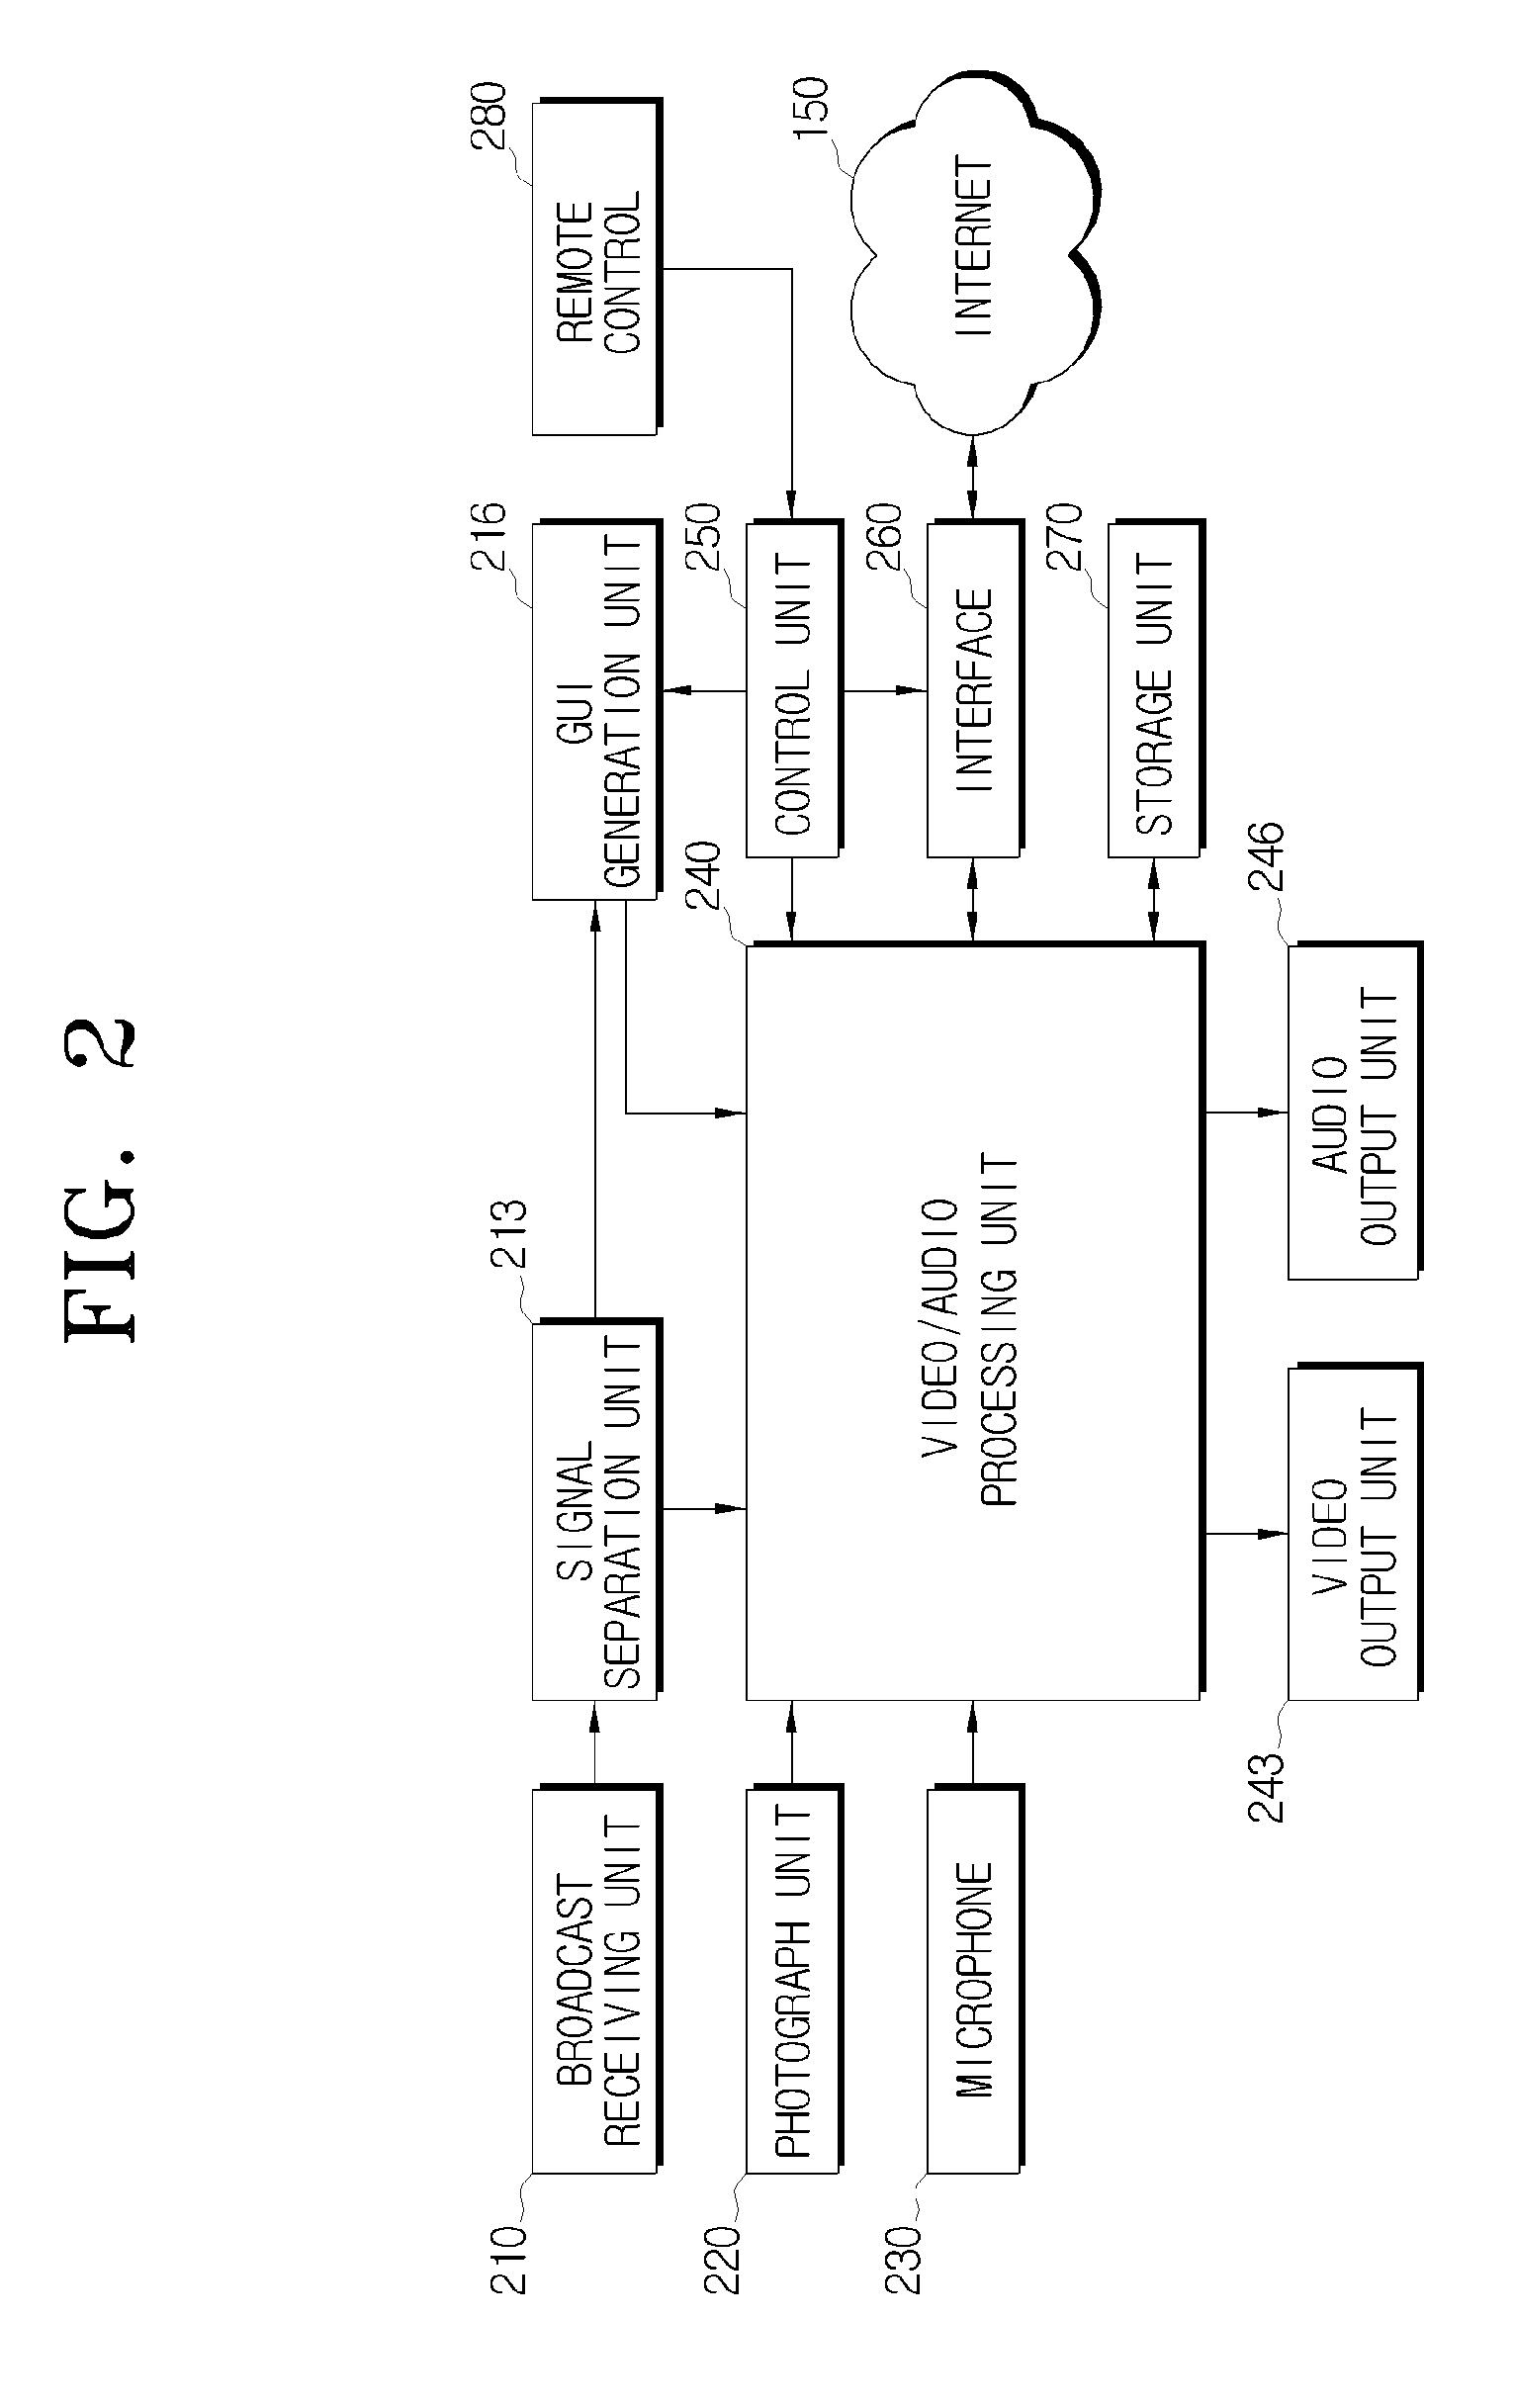 Method for providing viewing information for displaying a list of channels viewed by call recipients